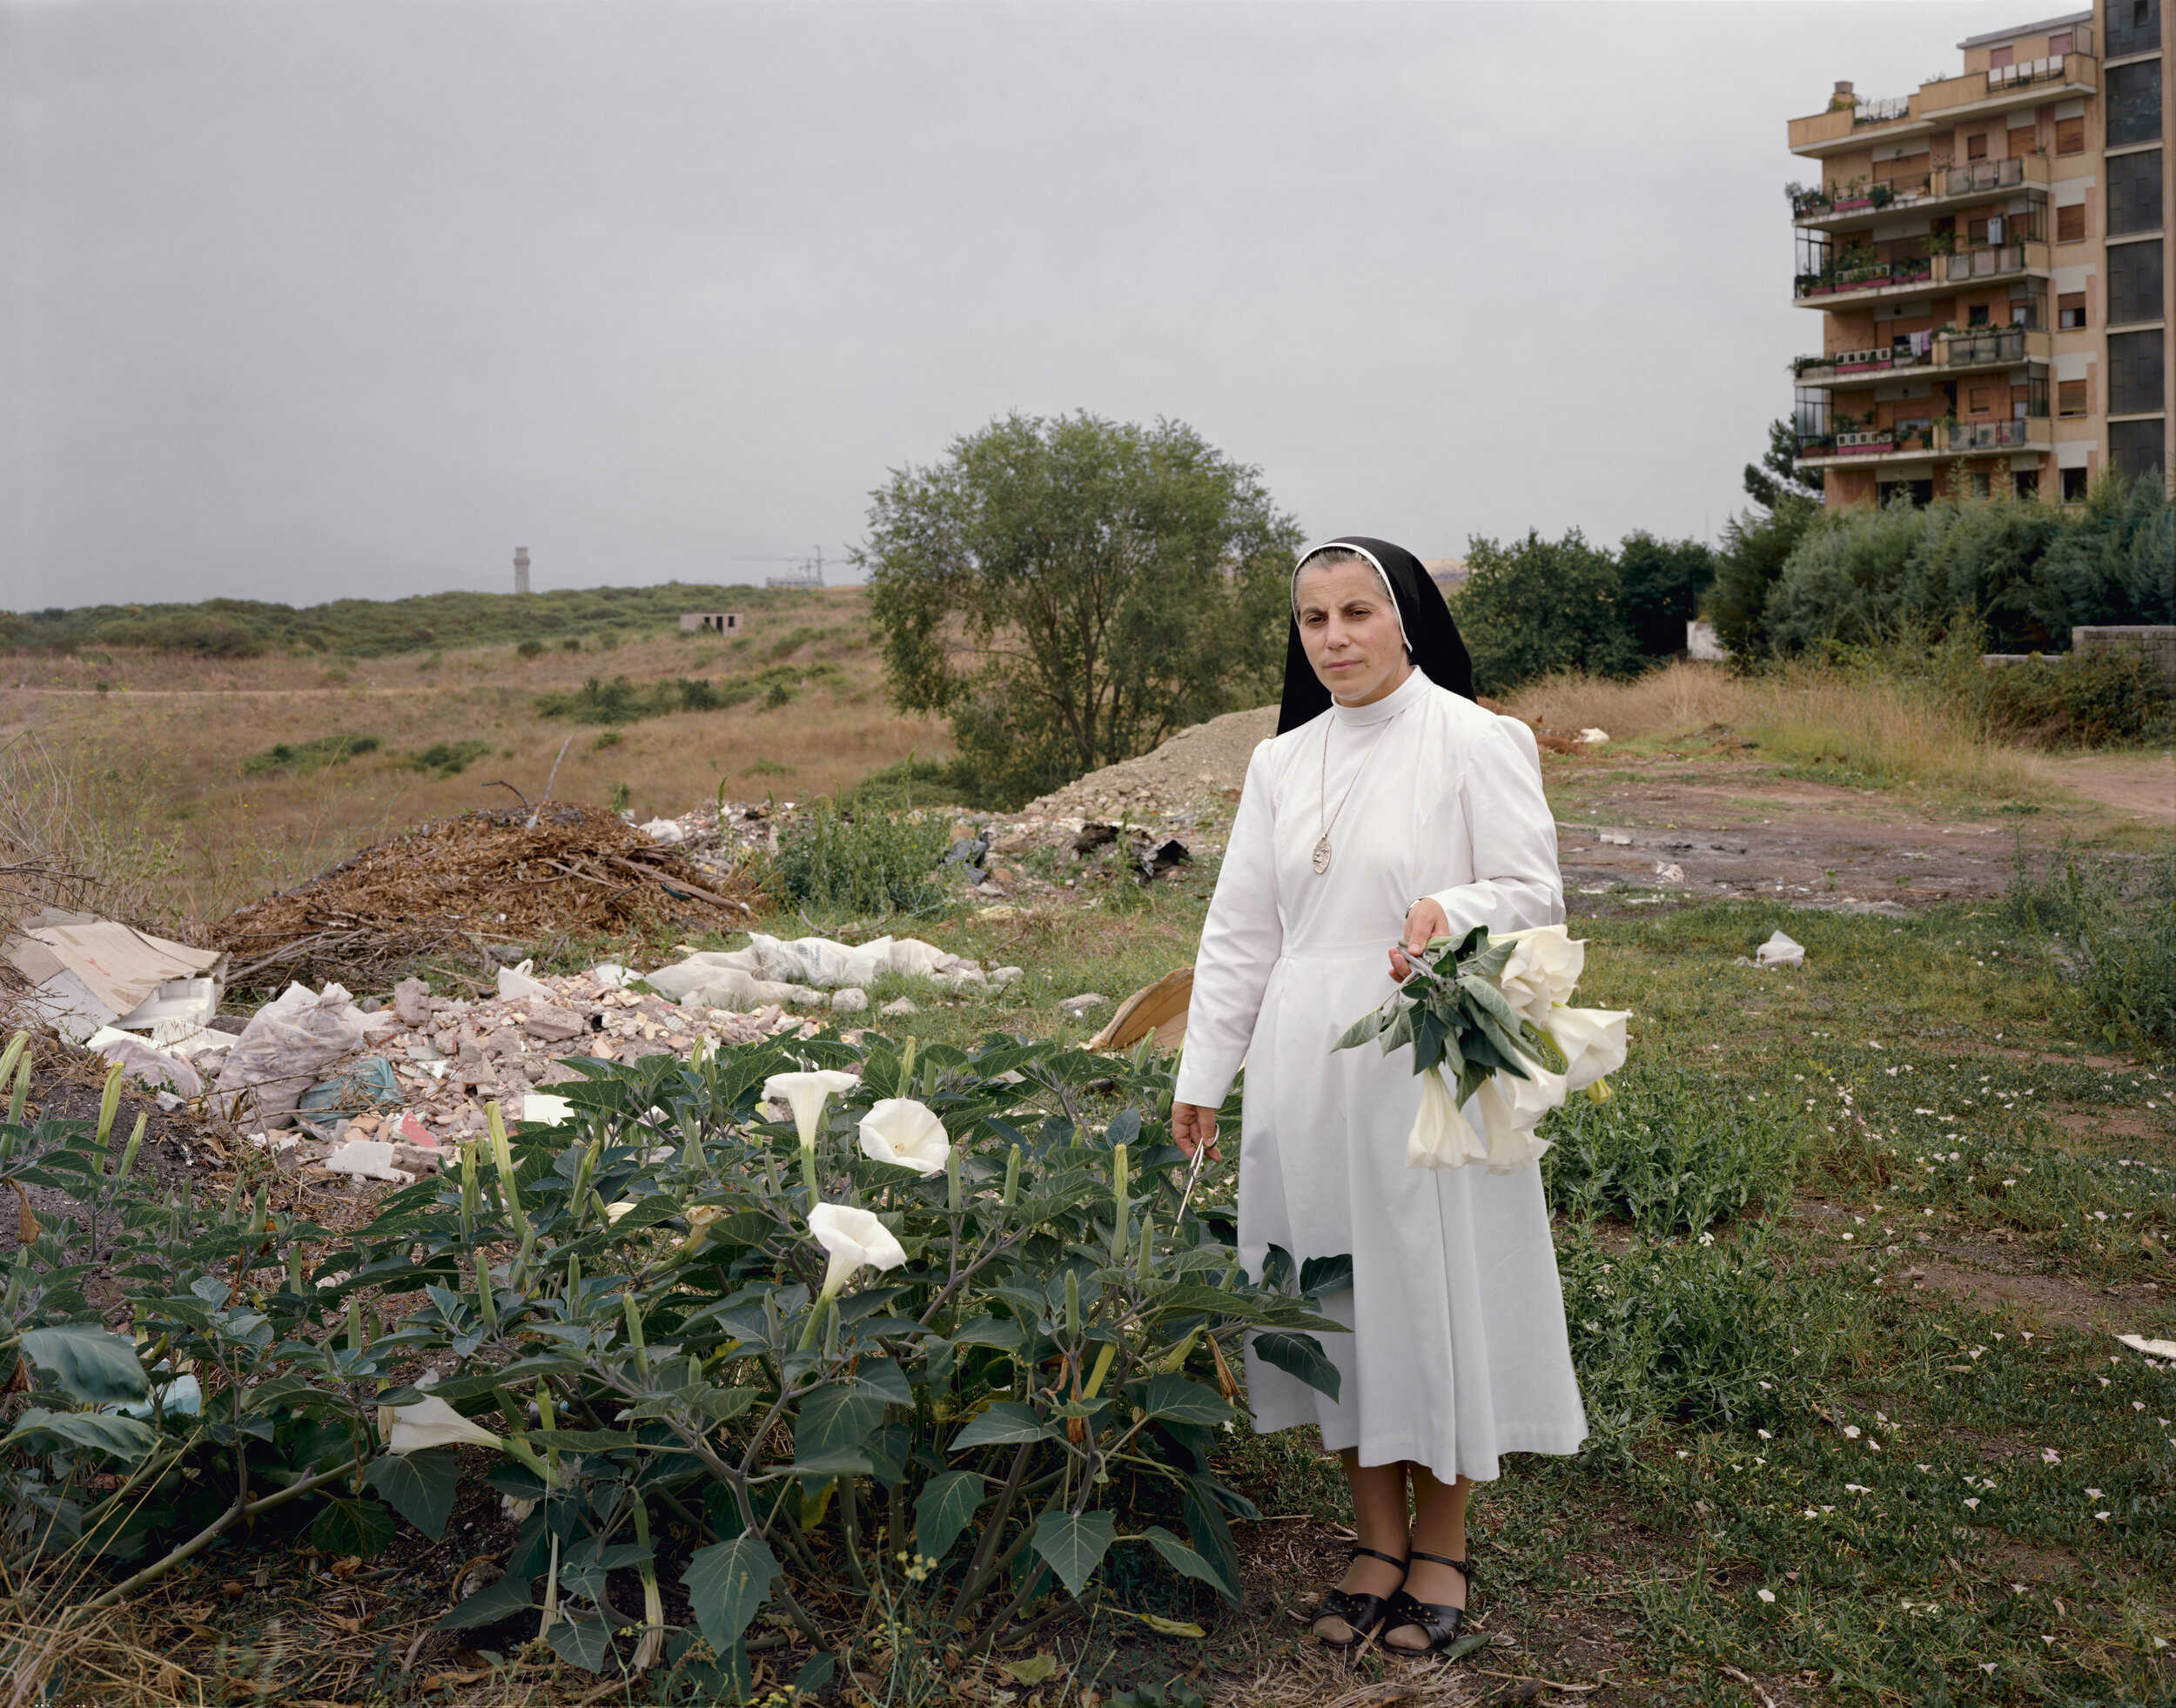 Picking angel’s -trumpets behind a convent, Via M. Bartoli, Rome, September 1990